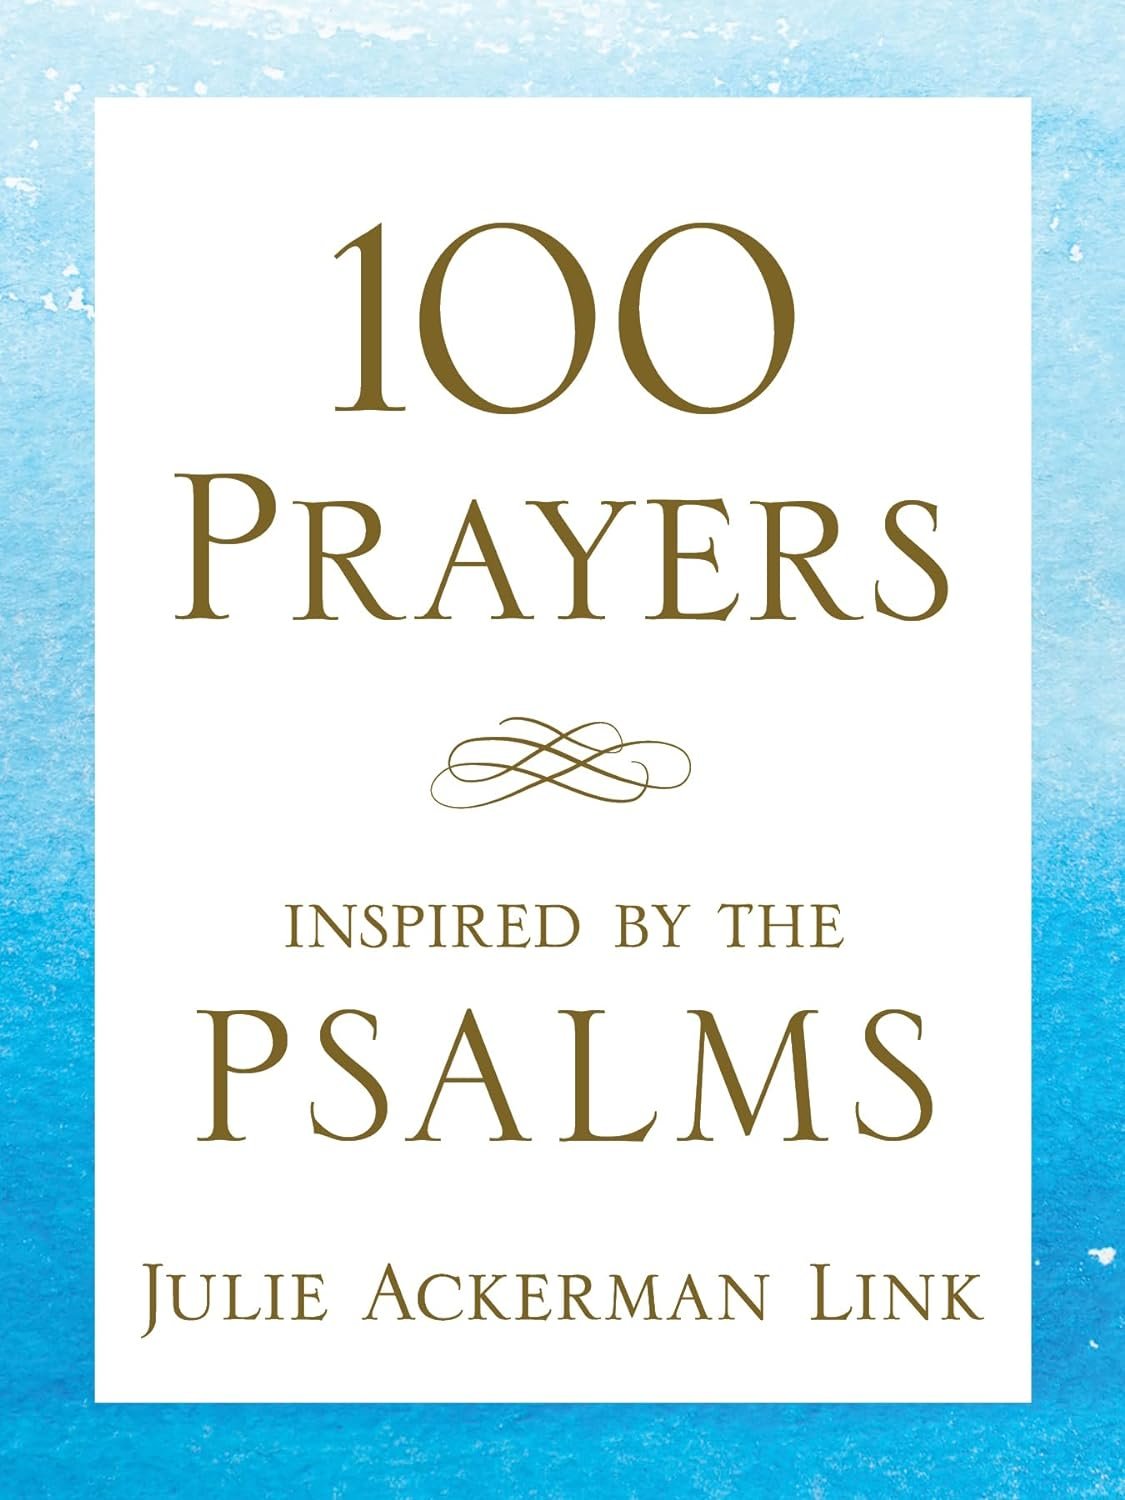 “100 Prayers Inspired by the Psalms” - Julie Ackerman Link